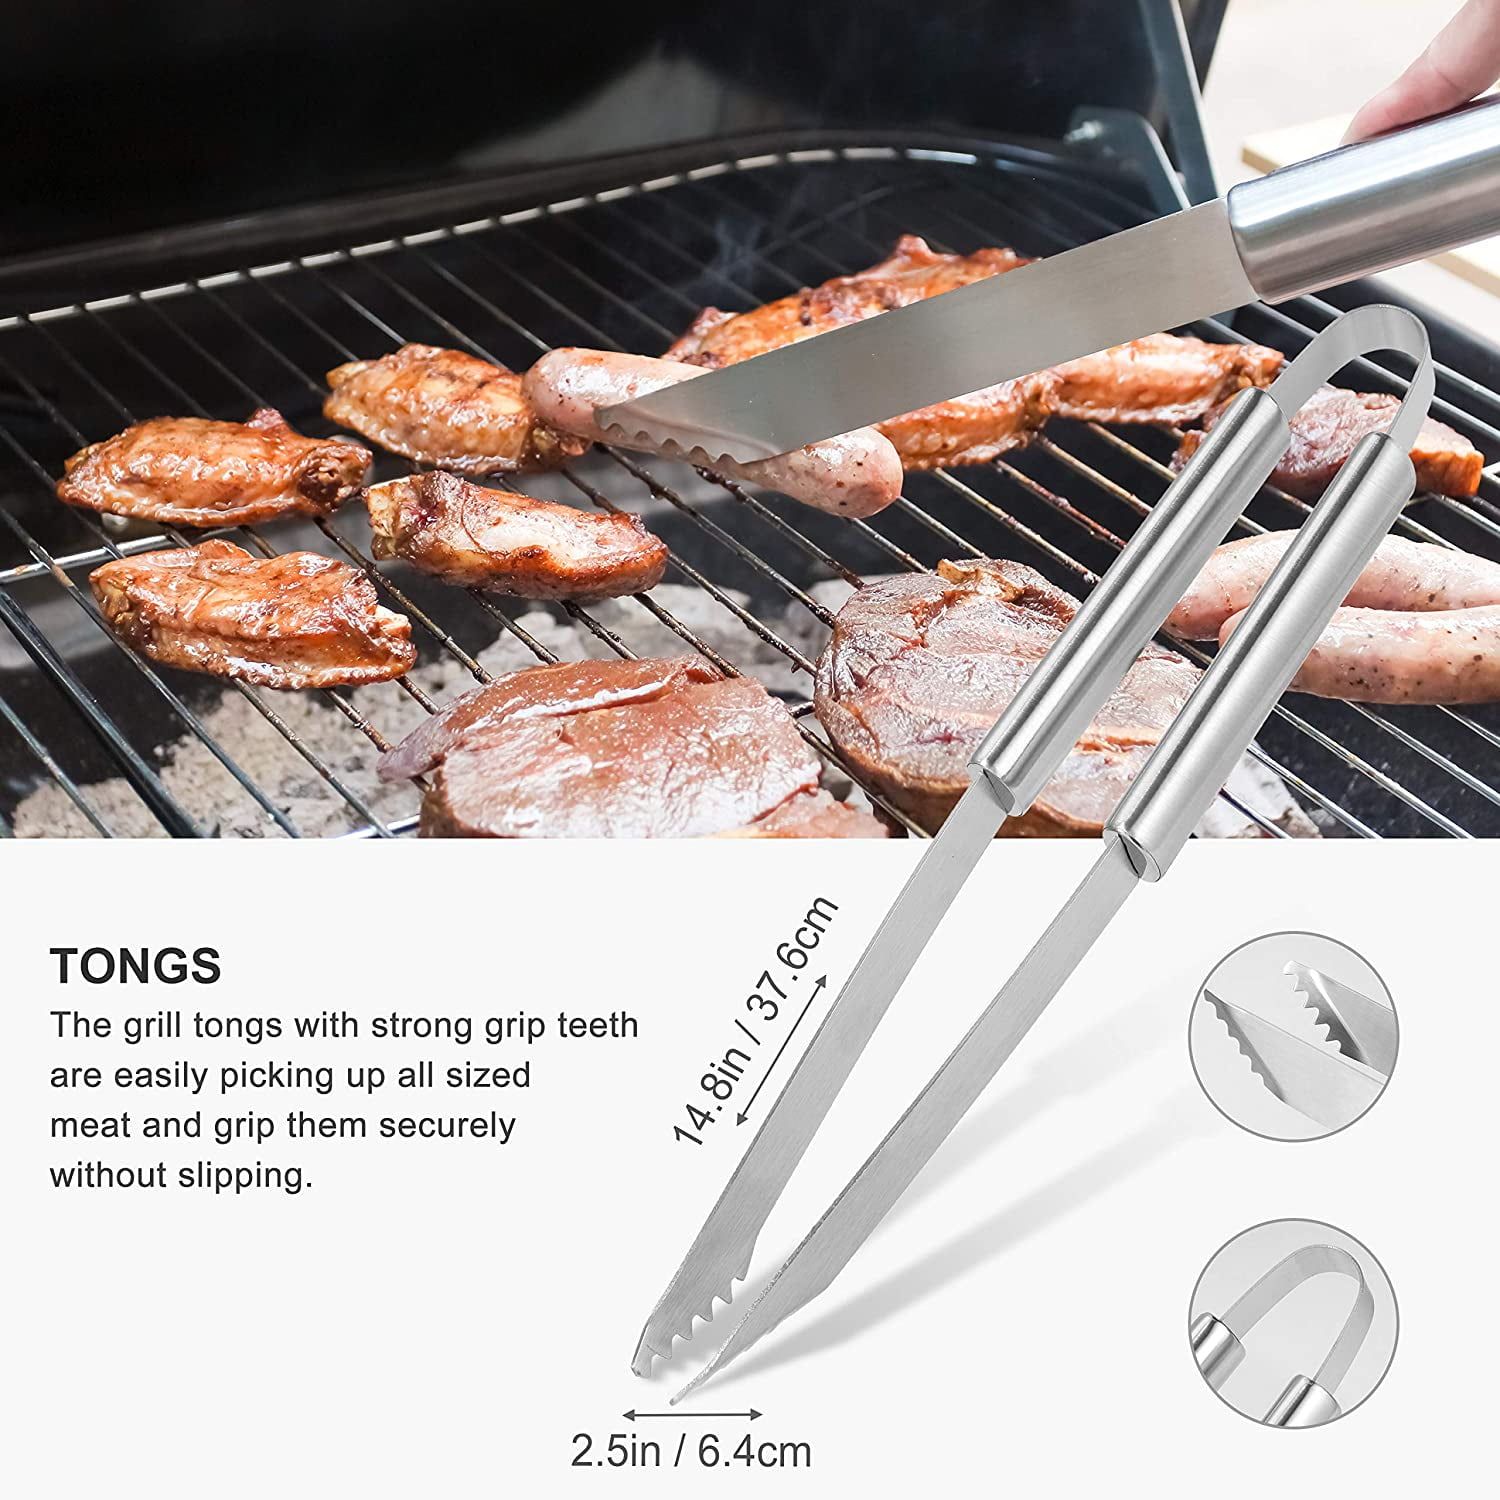 Grilljoy 31PC BBQ Grill Accessories Set, Heavy Duty BBQ Tools Set for Men &  Women Gift, Grill Utensils kit with Scissors, Grilling Accessories with